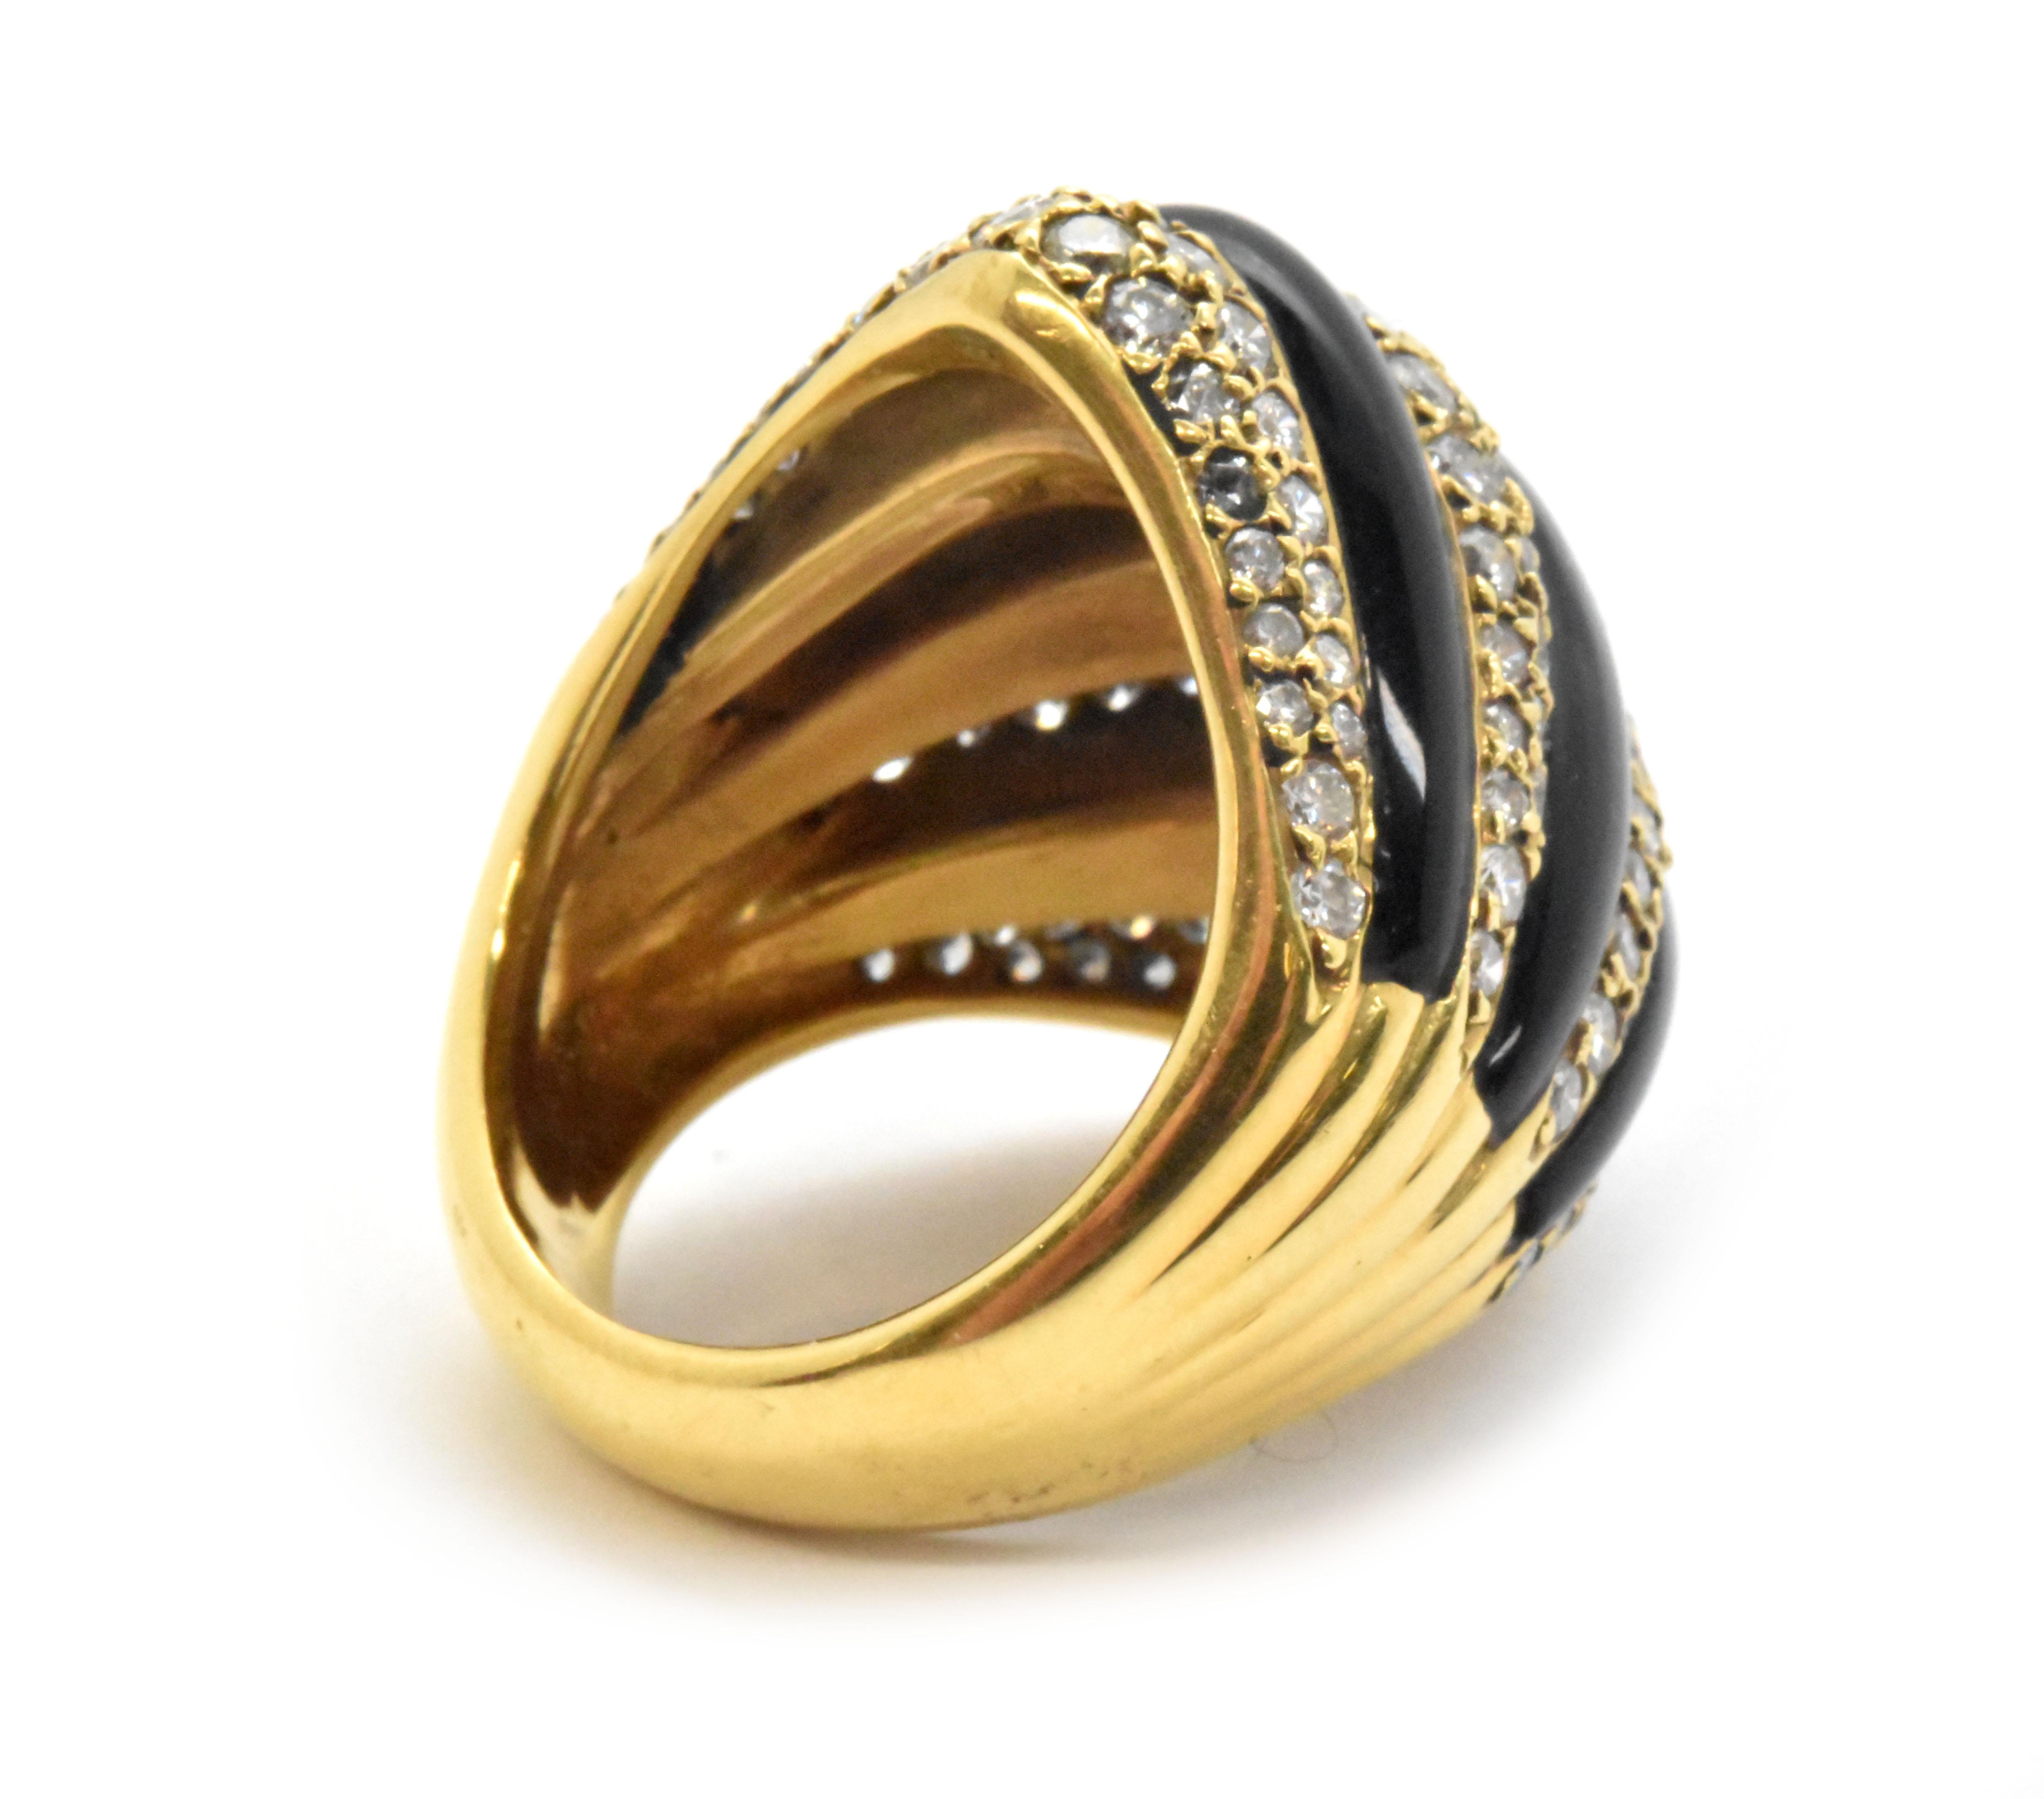 Contemporary 18 Karat Yellow Gold, 2.80 Carat Diamond and Onyx Dome Ring For Sale